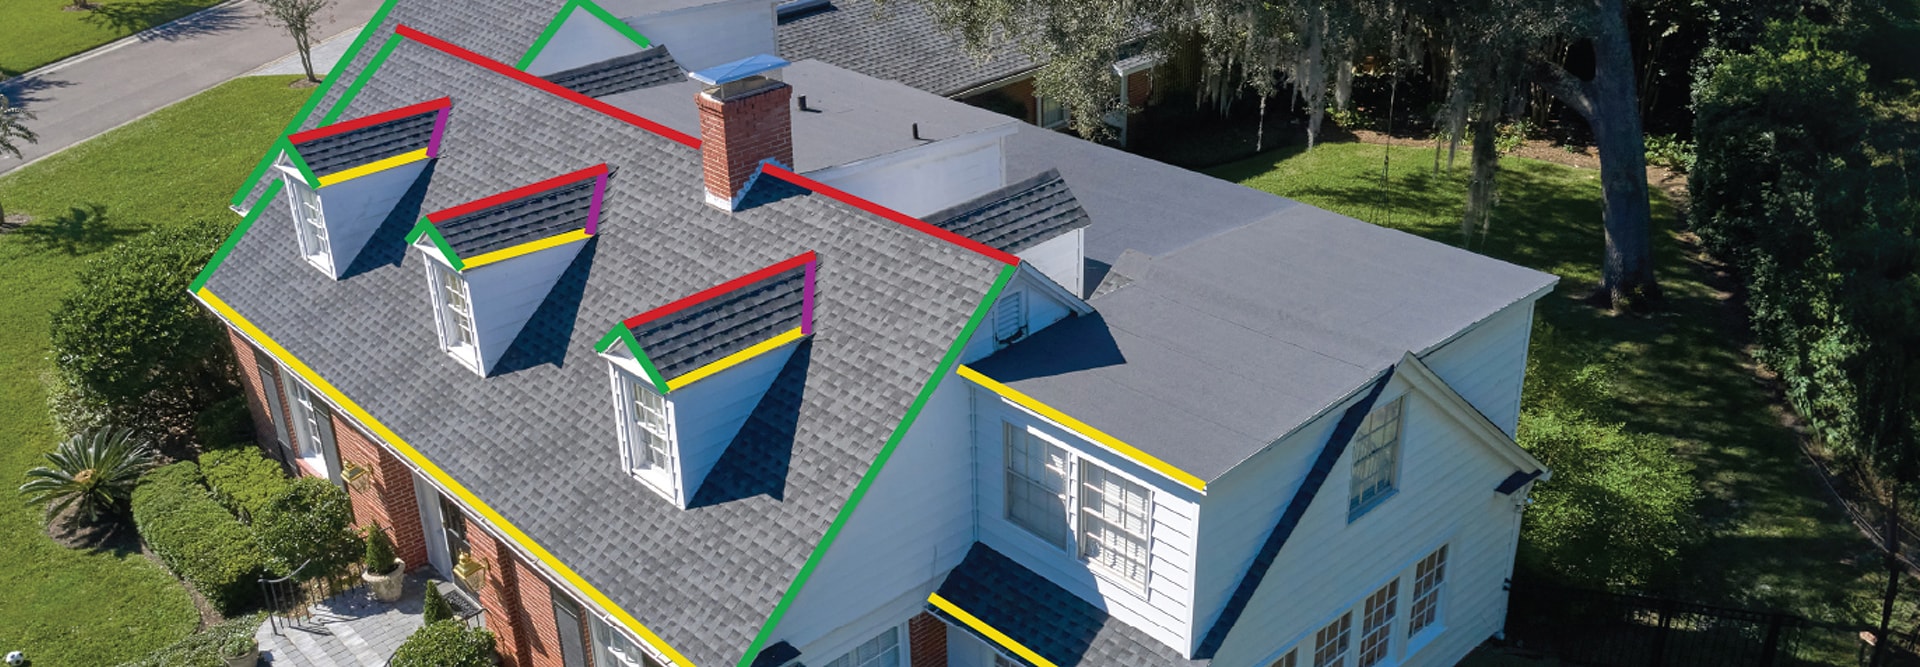 Single family home outline with roof measurements provided by GAF QuickMeasure